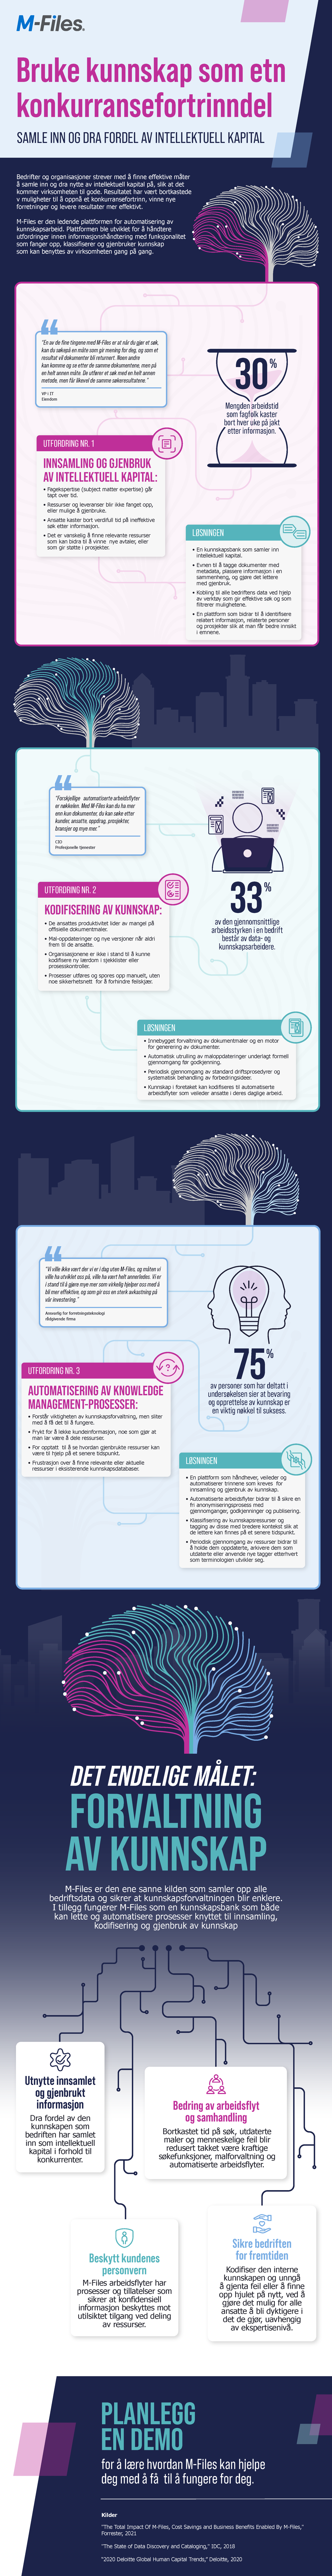 Knowledge Management infographic - NO